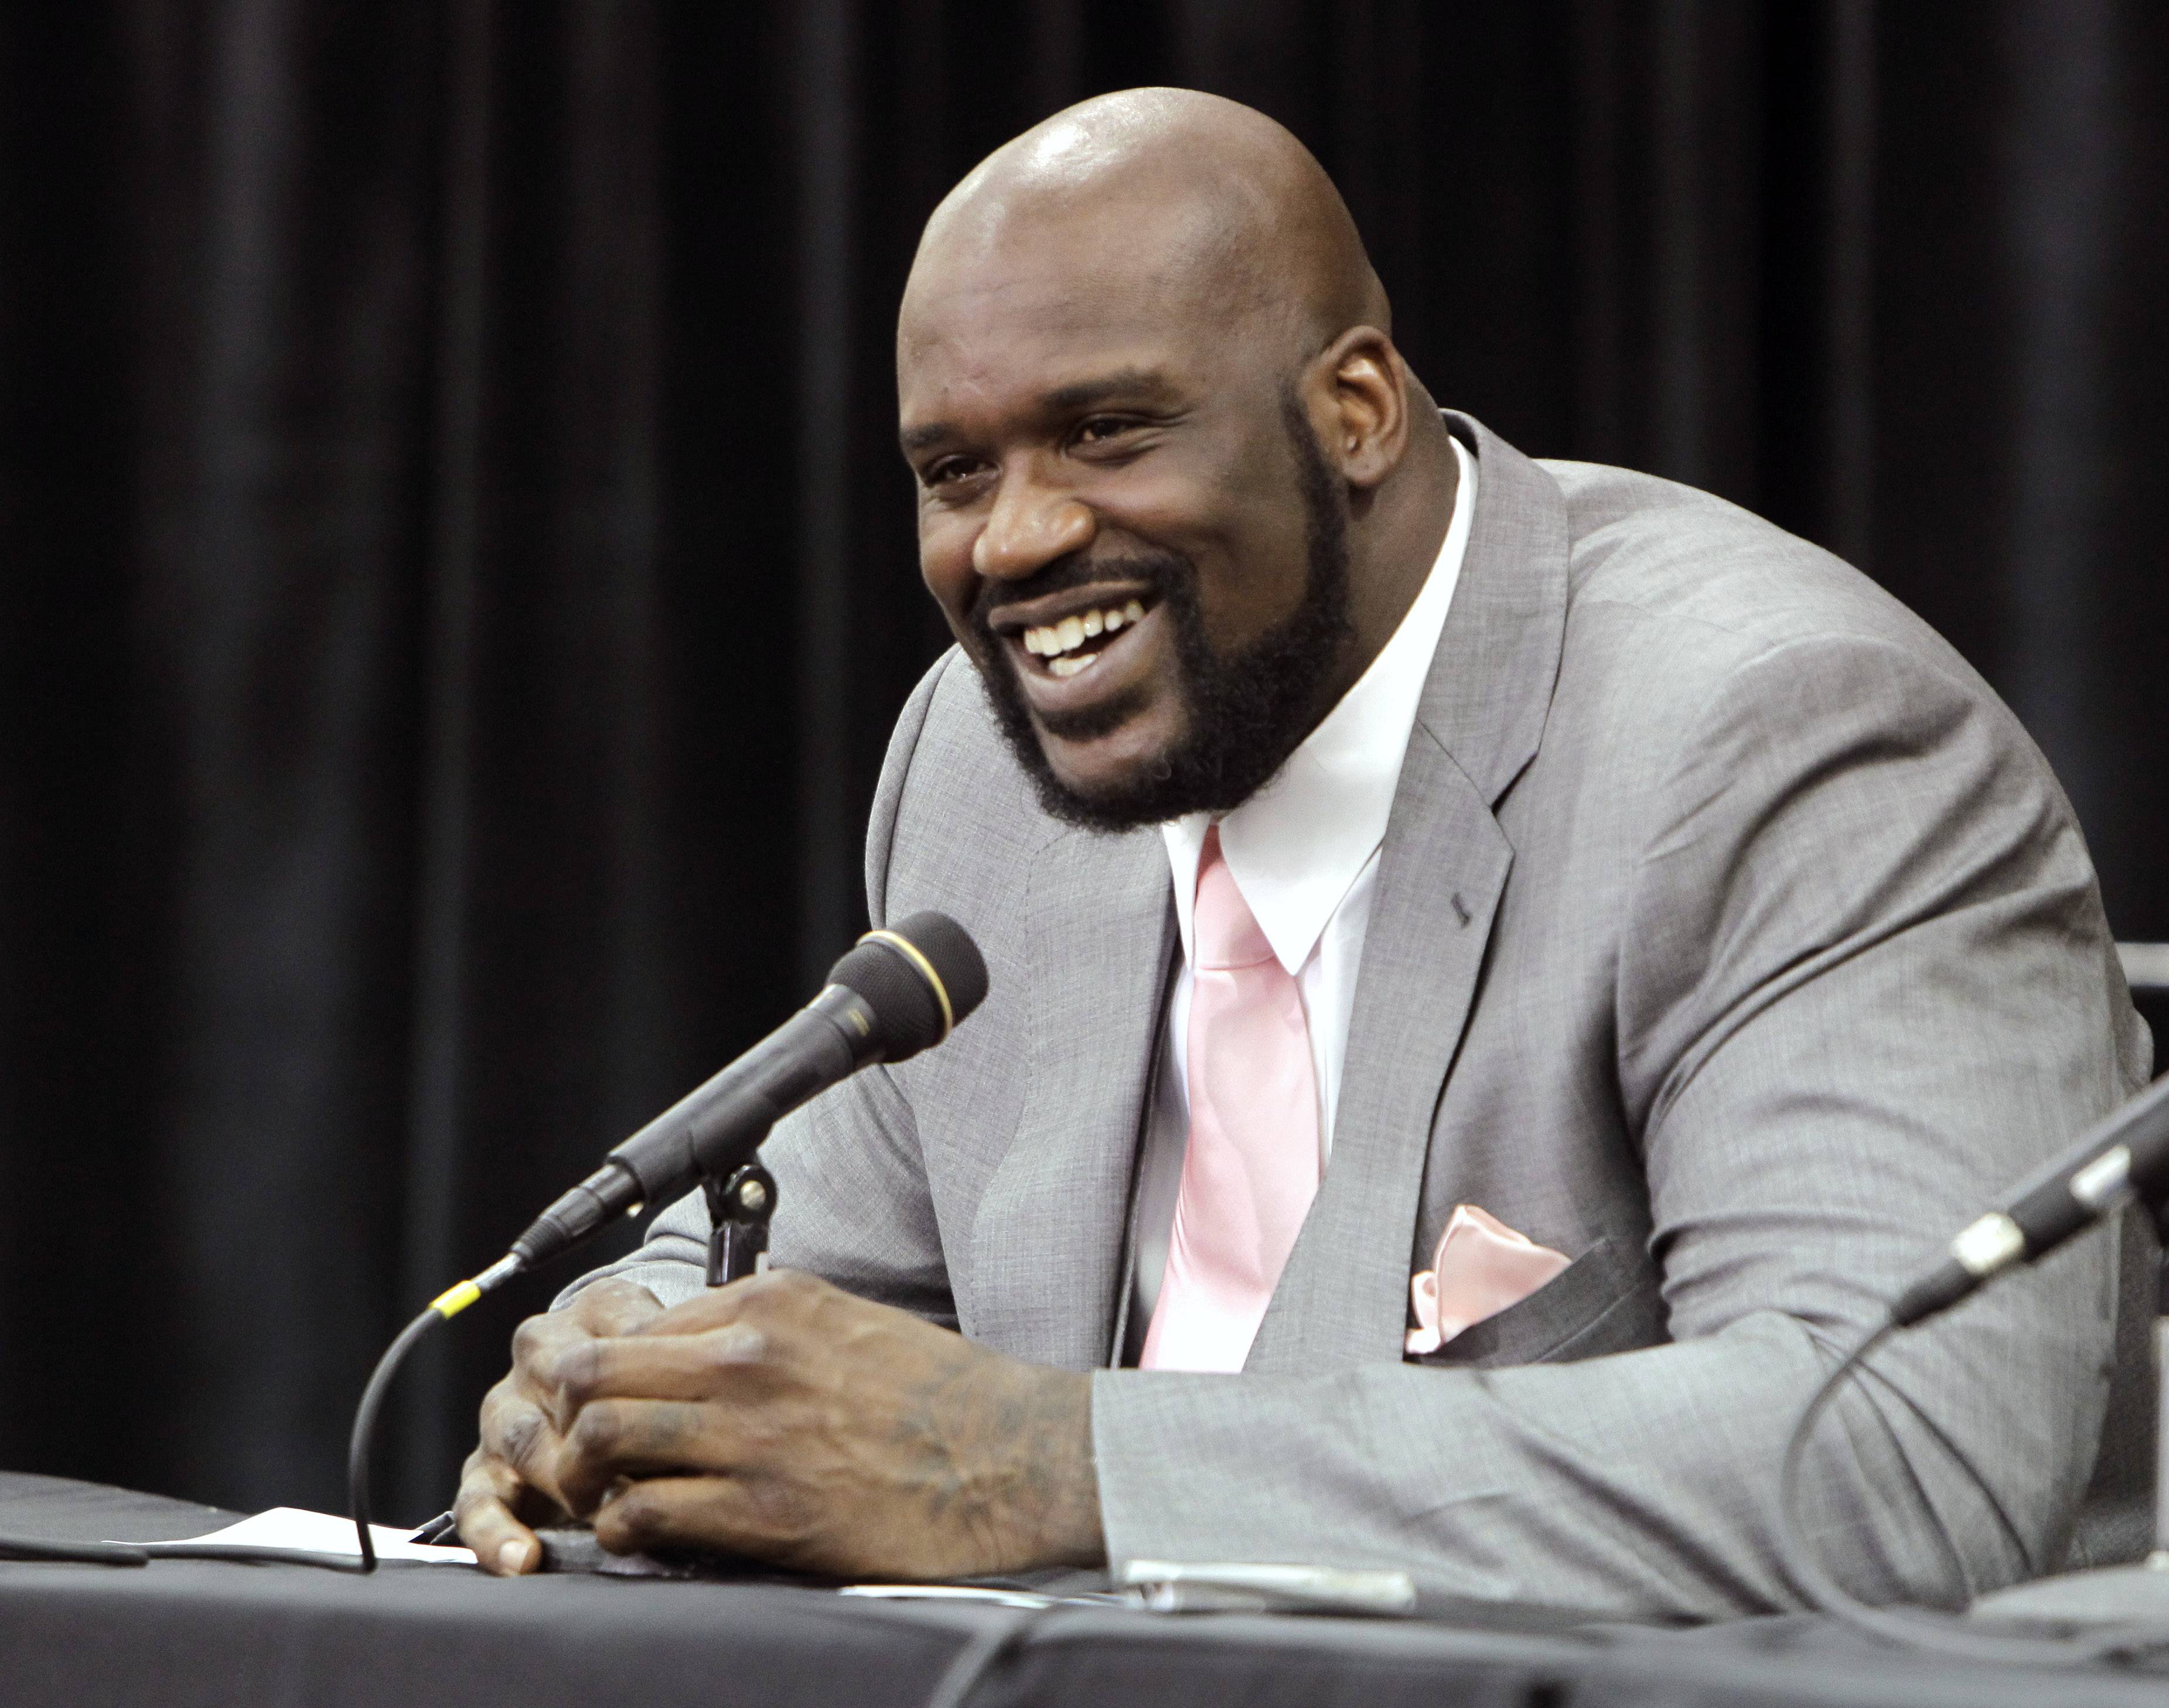 Shaquille O'Neal - @SHAQ: Another legend lost. RIP to the great Joe Frazier, peace brother you will be missed (Photo: AP Photo/John Raoux, File)